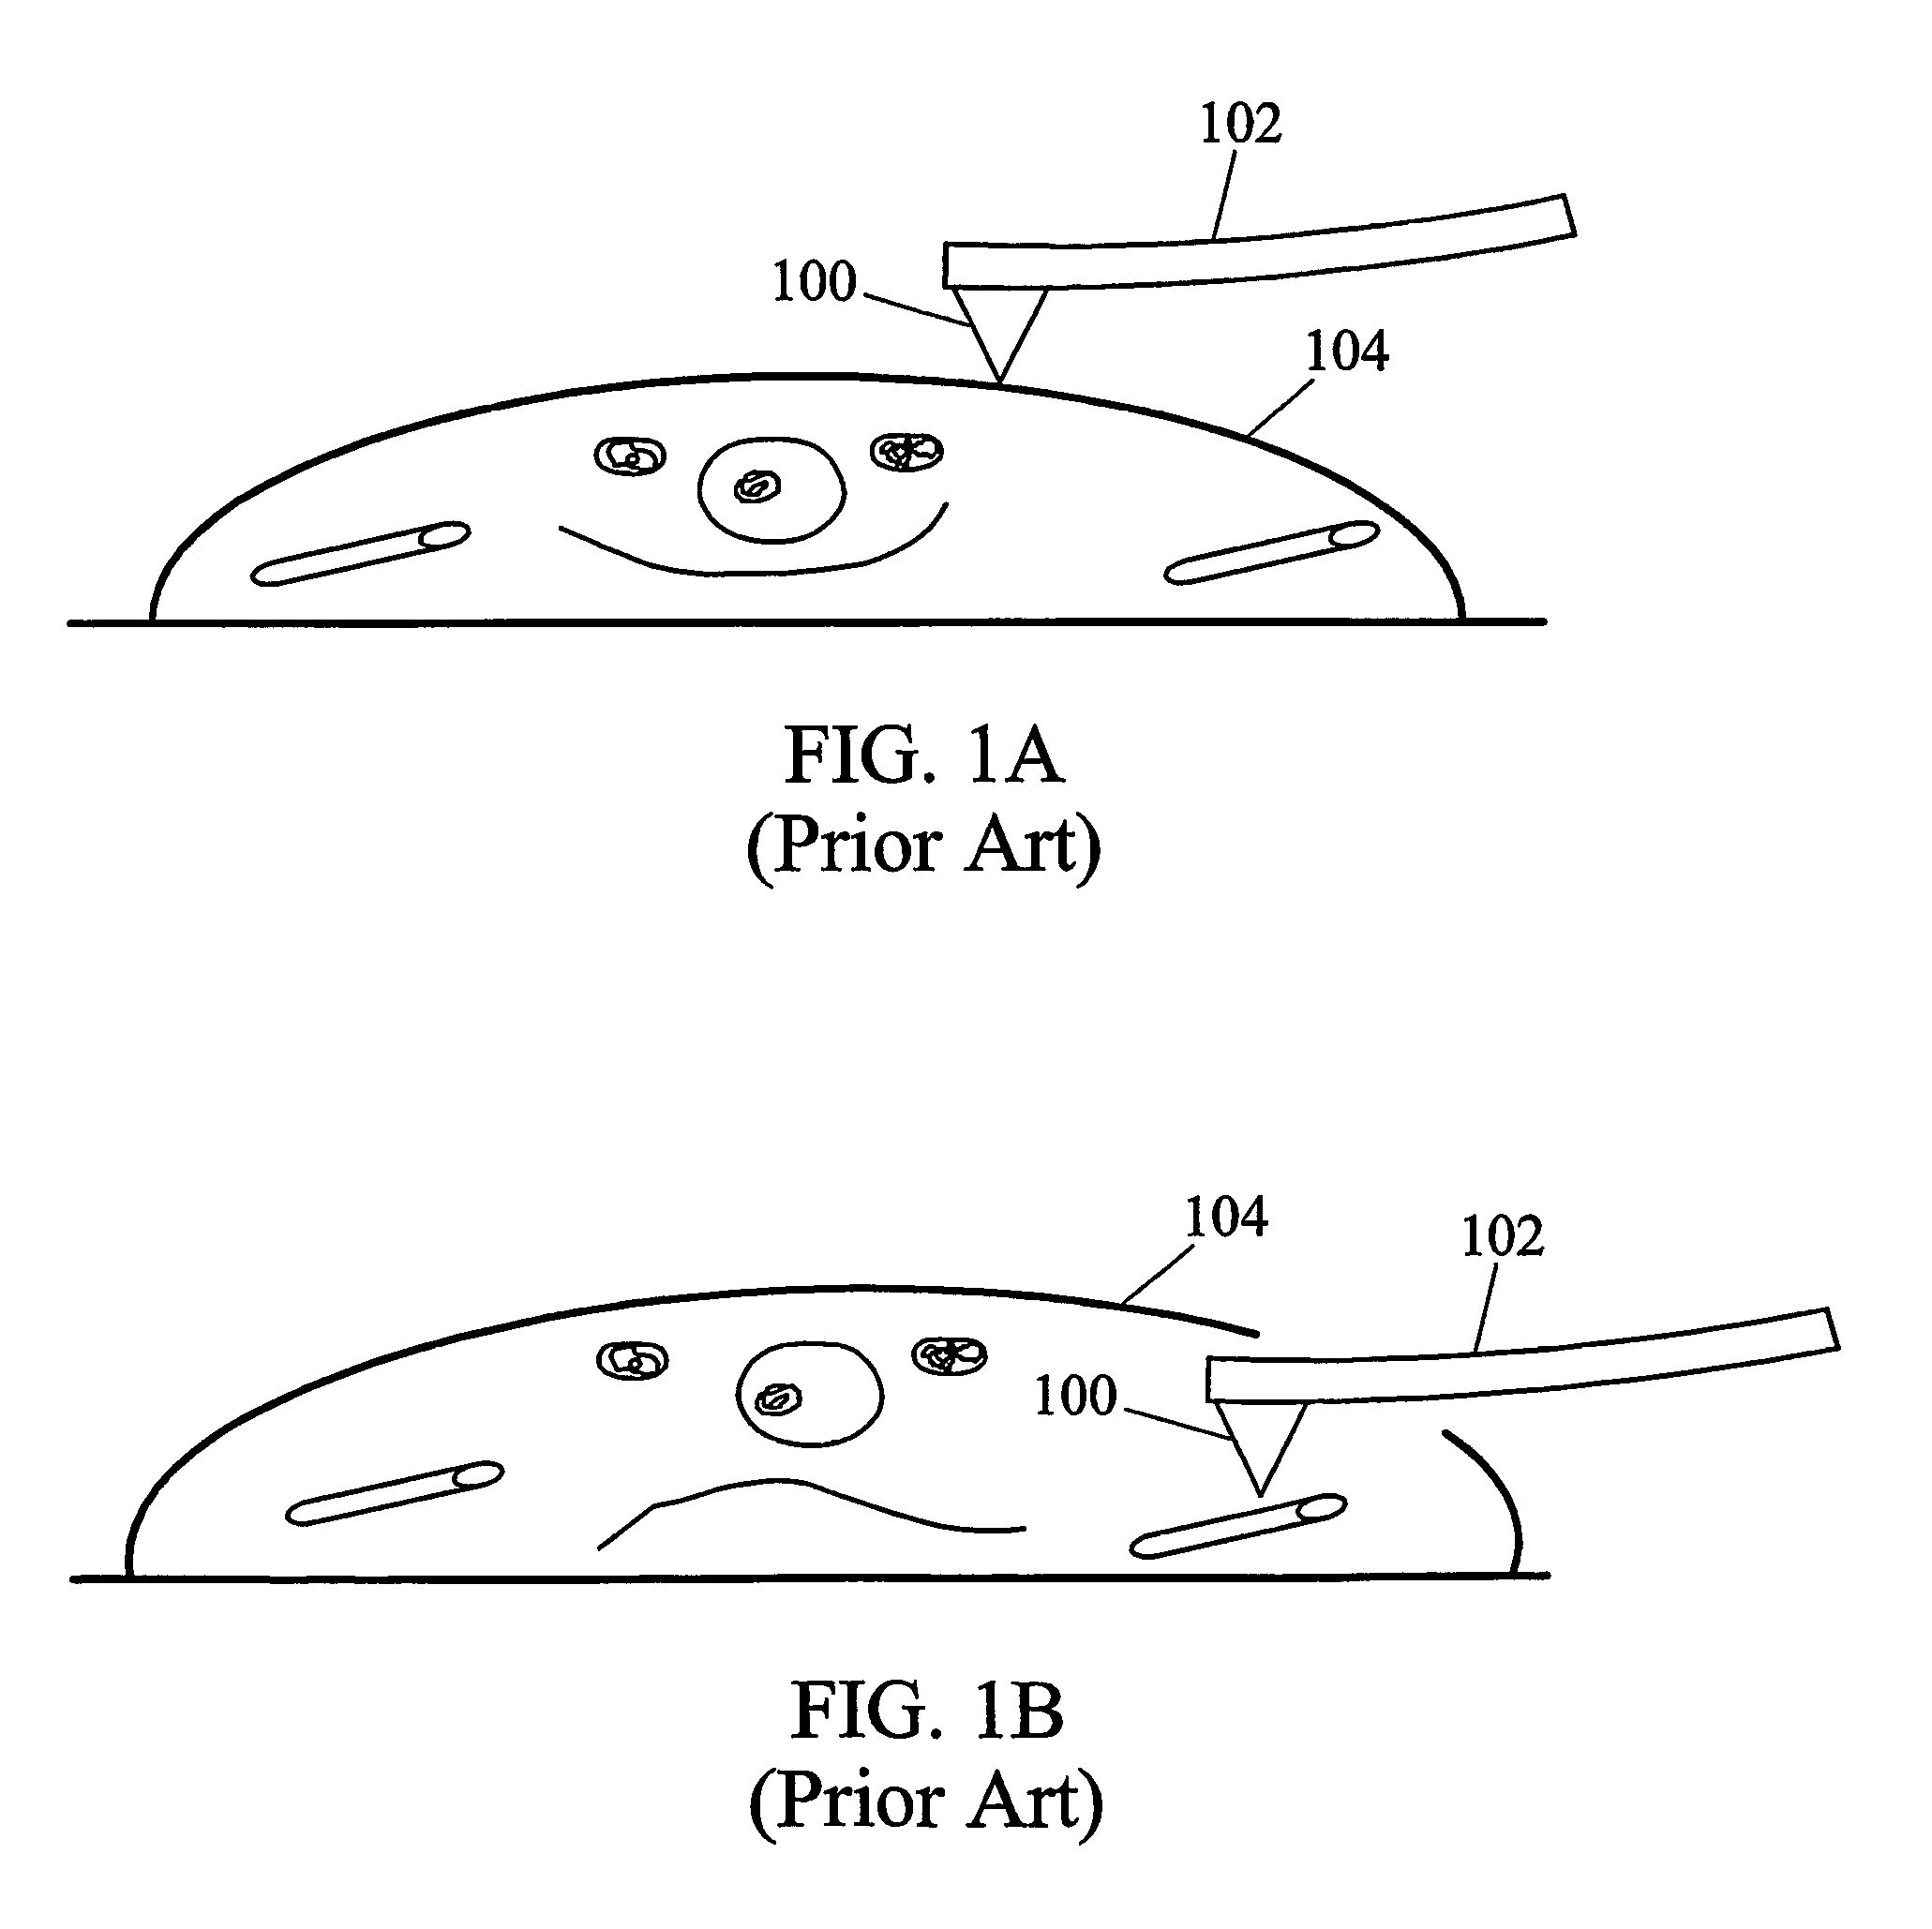 Methods and systems for three-dimensional motion control and tracking of a mechanically unattached magnetic probe